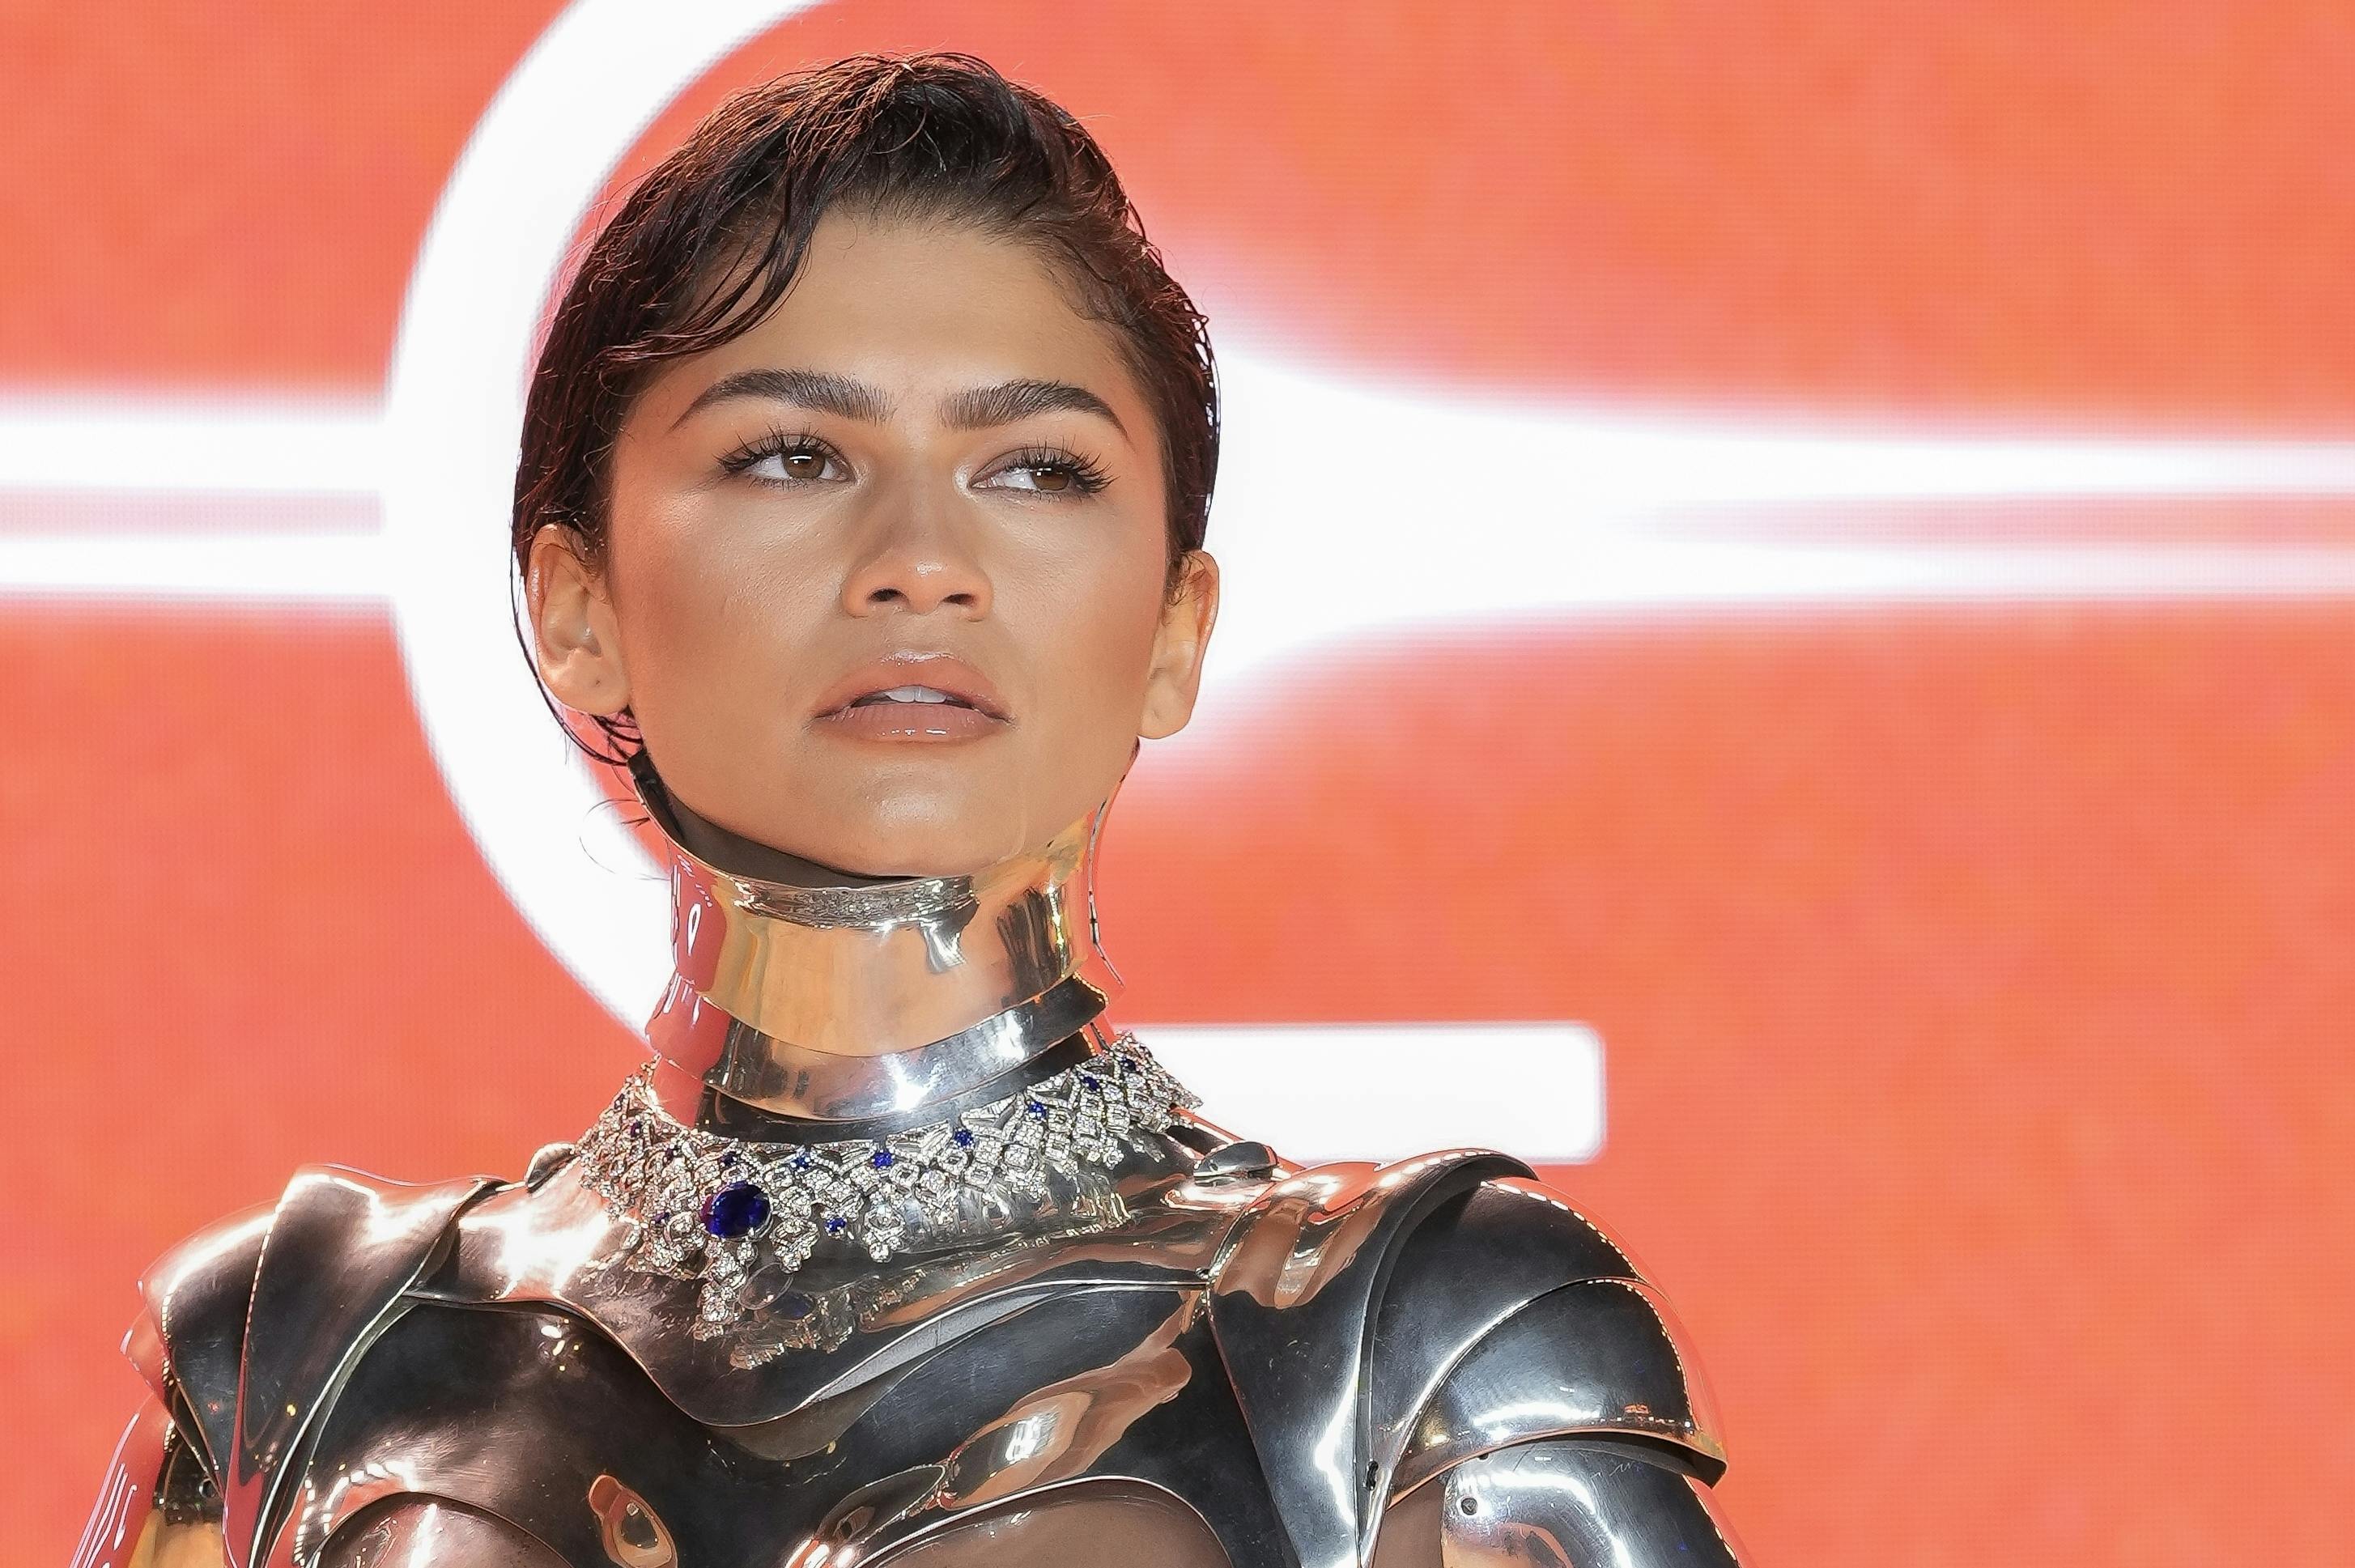 Zendaya poses for photographers upon arrival at the World premiere of the film 'Dune: Part Two' on Thursday, Feb. 15, 2024 in London. (Photo by Scott Garfitt/Invision/AP)